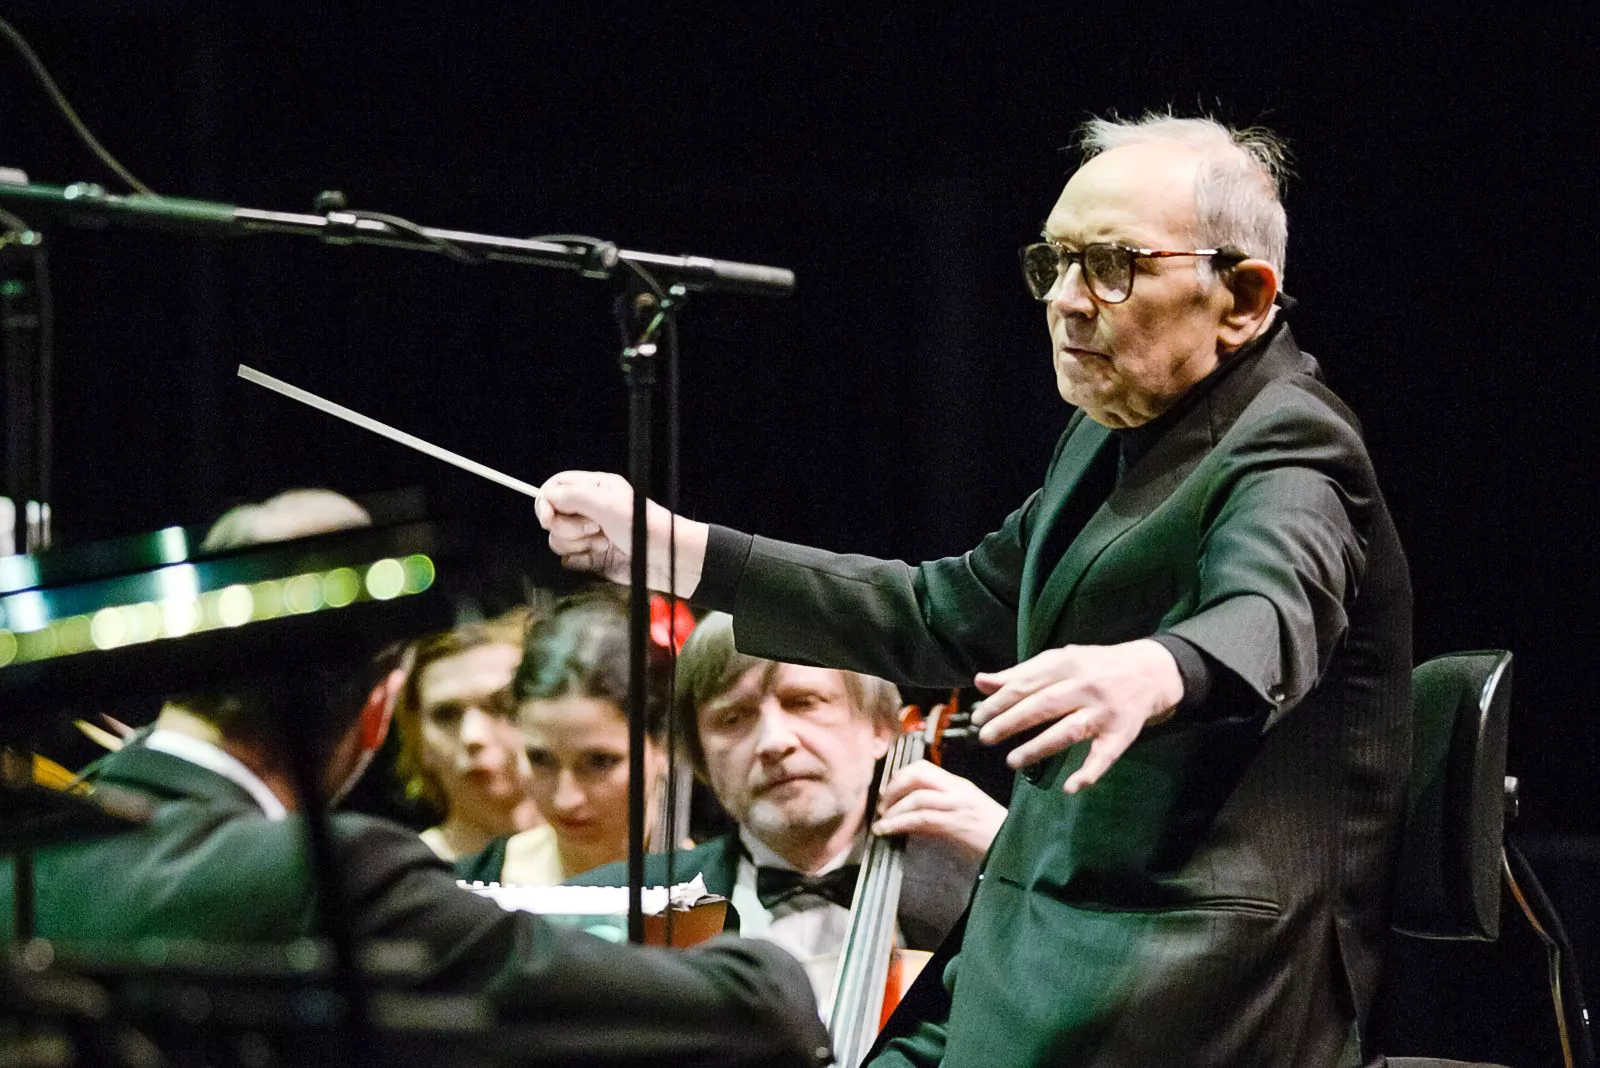 Ennio Morricone at the London leg of his 'My Life In Music' world tour at the O2 Arena on February 5, 2015.